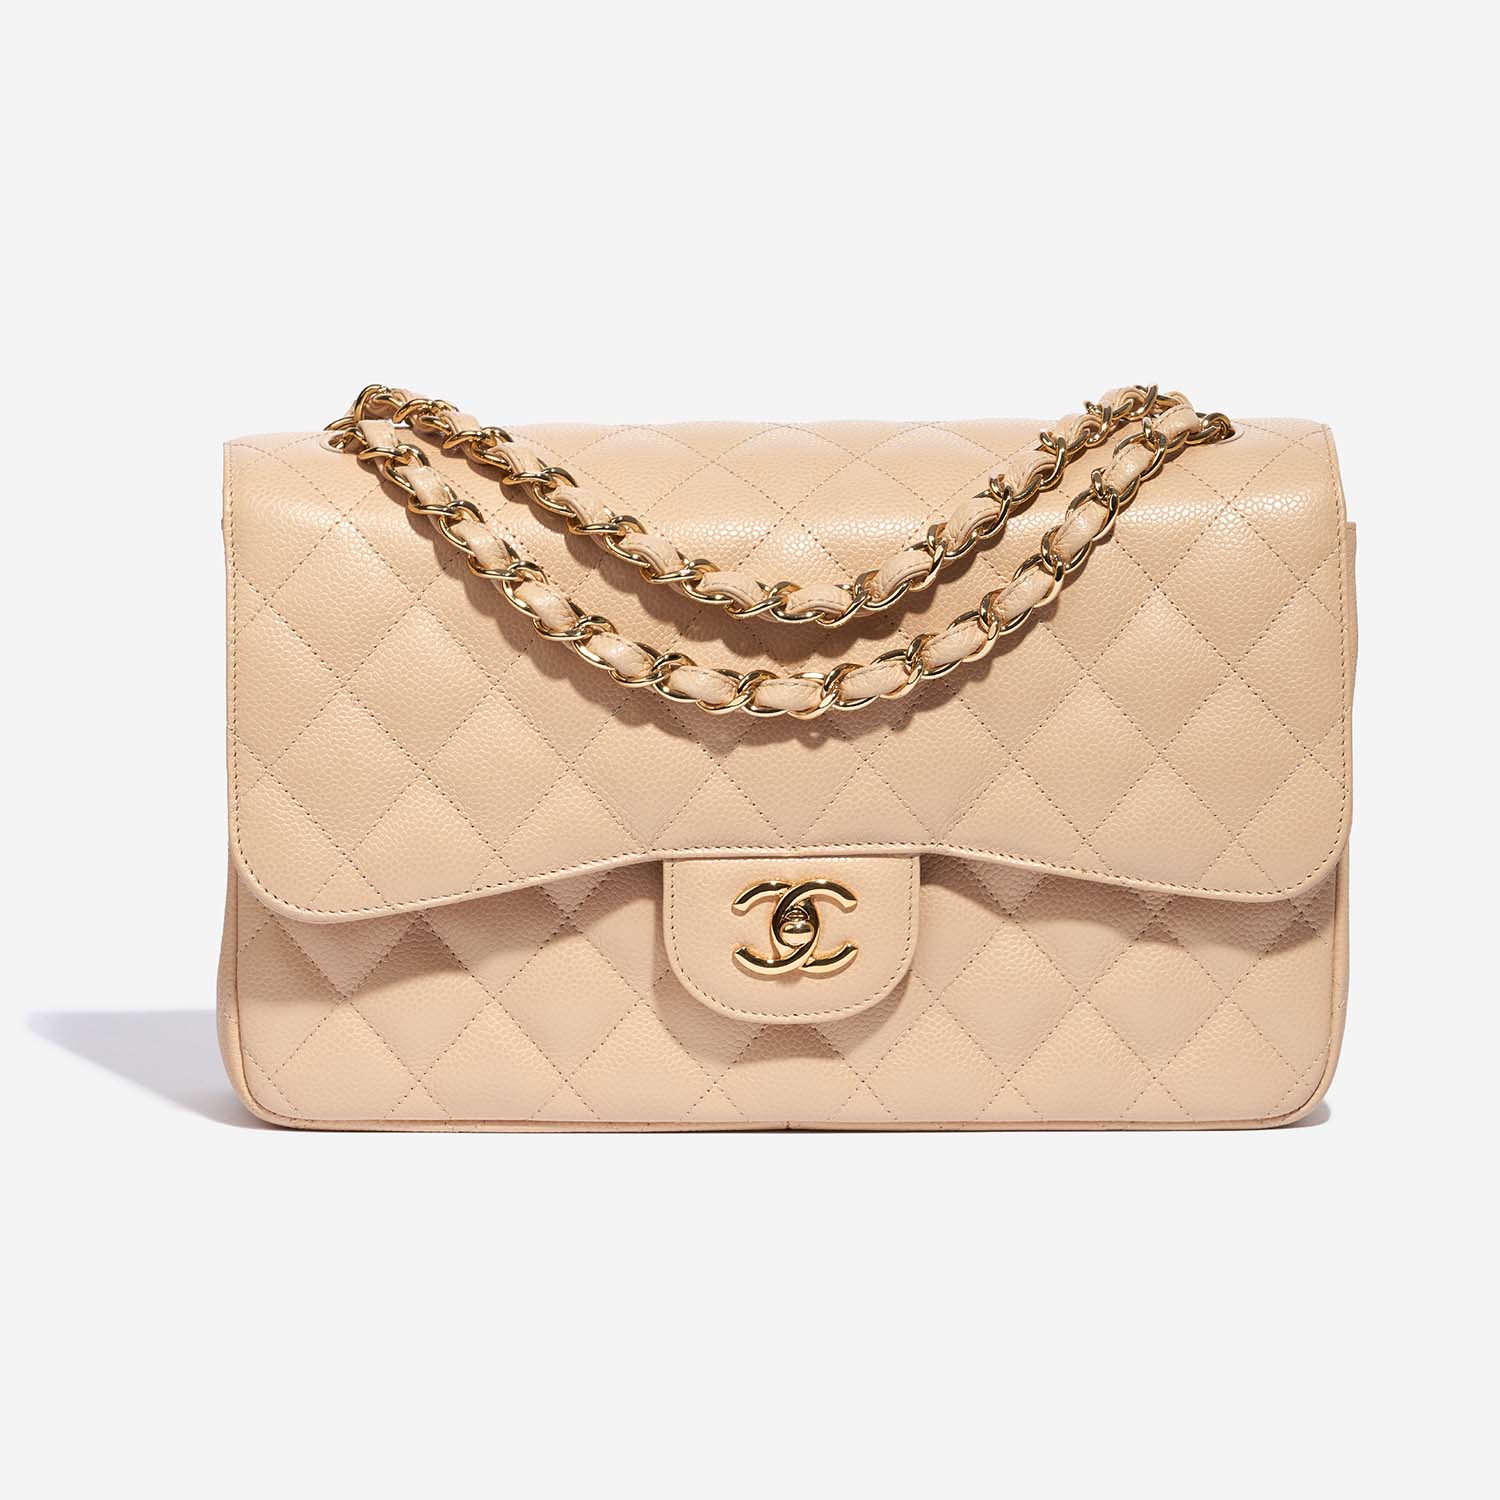 Pre-owned Chanel Jumbo Classic Double Flap Bag Beige Caviar Gold Hardware